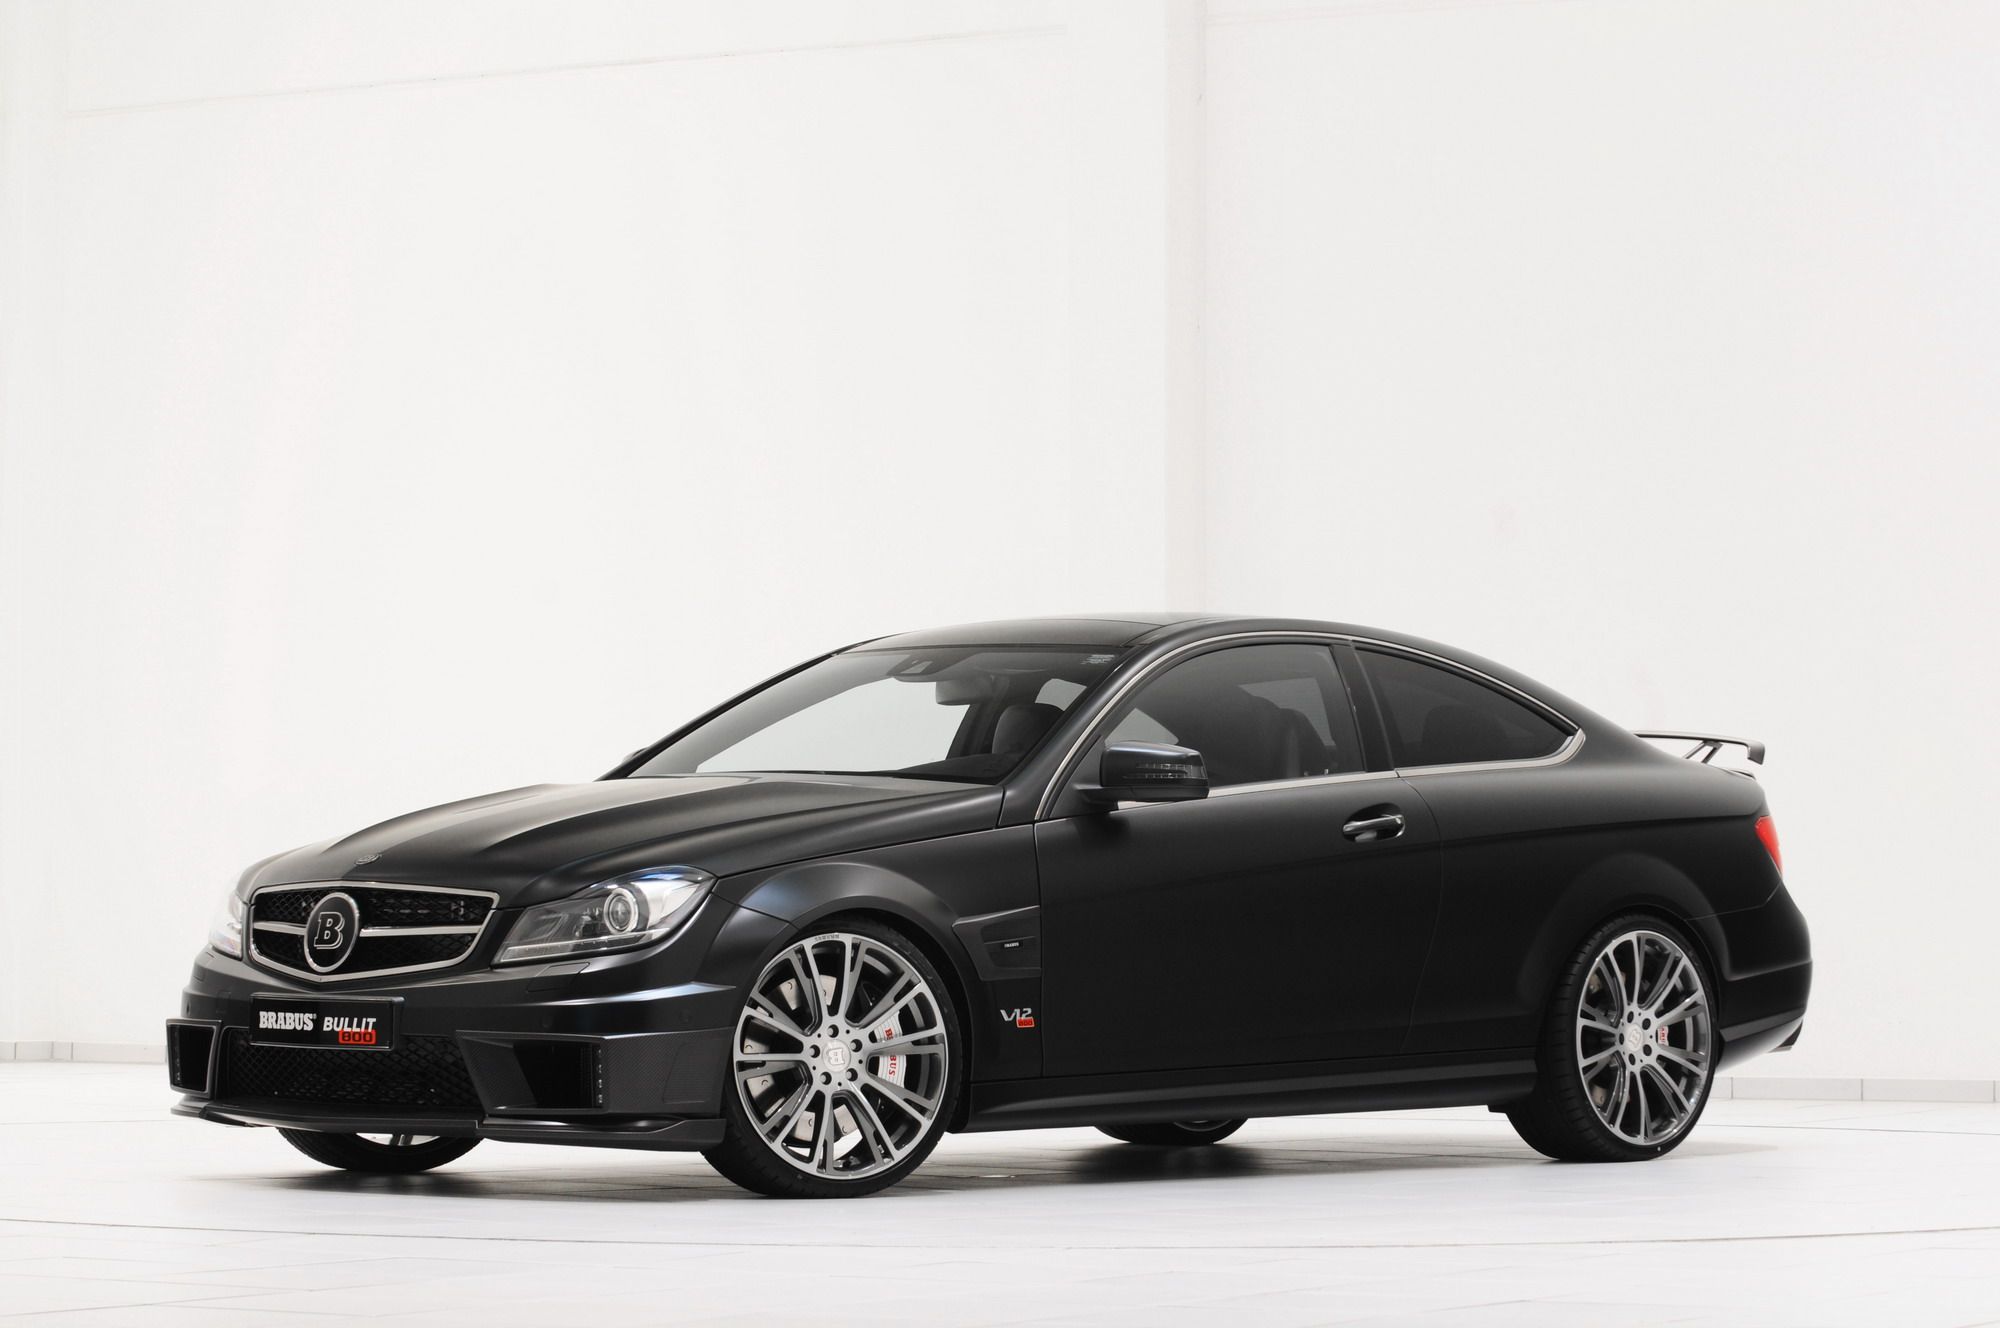 2012 Mercedes C-Class Bullit Coupe by Brabus